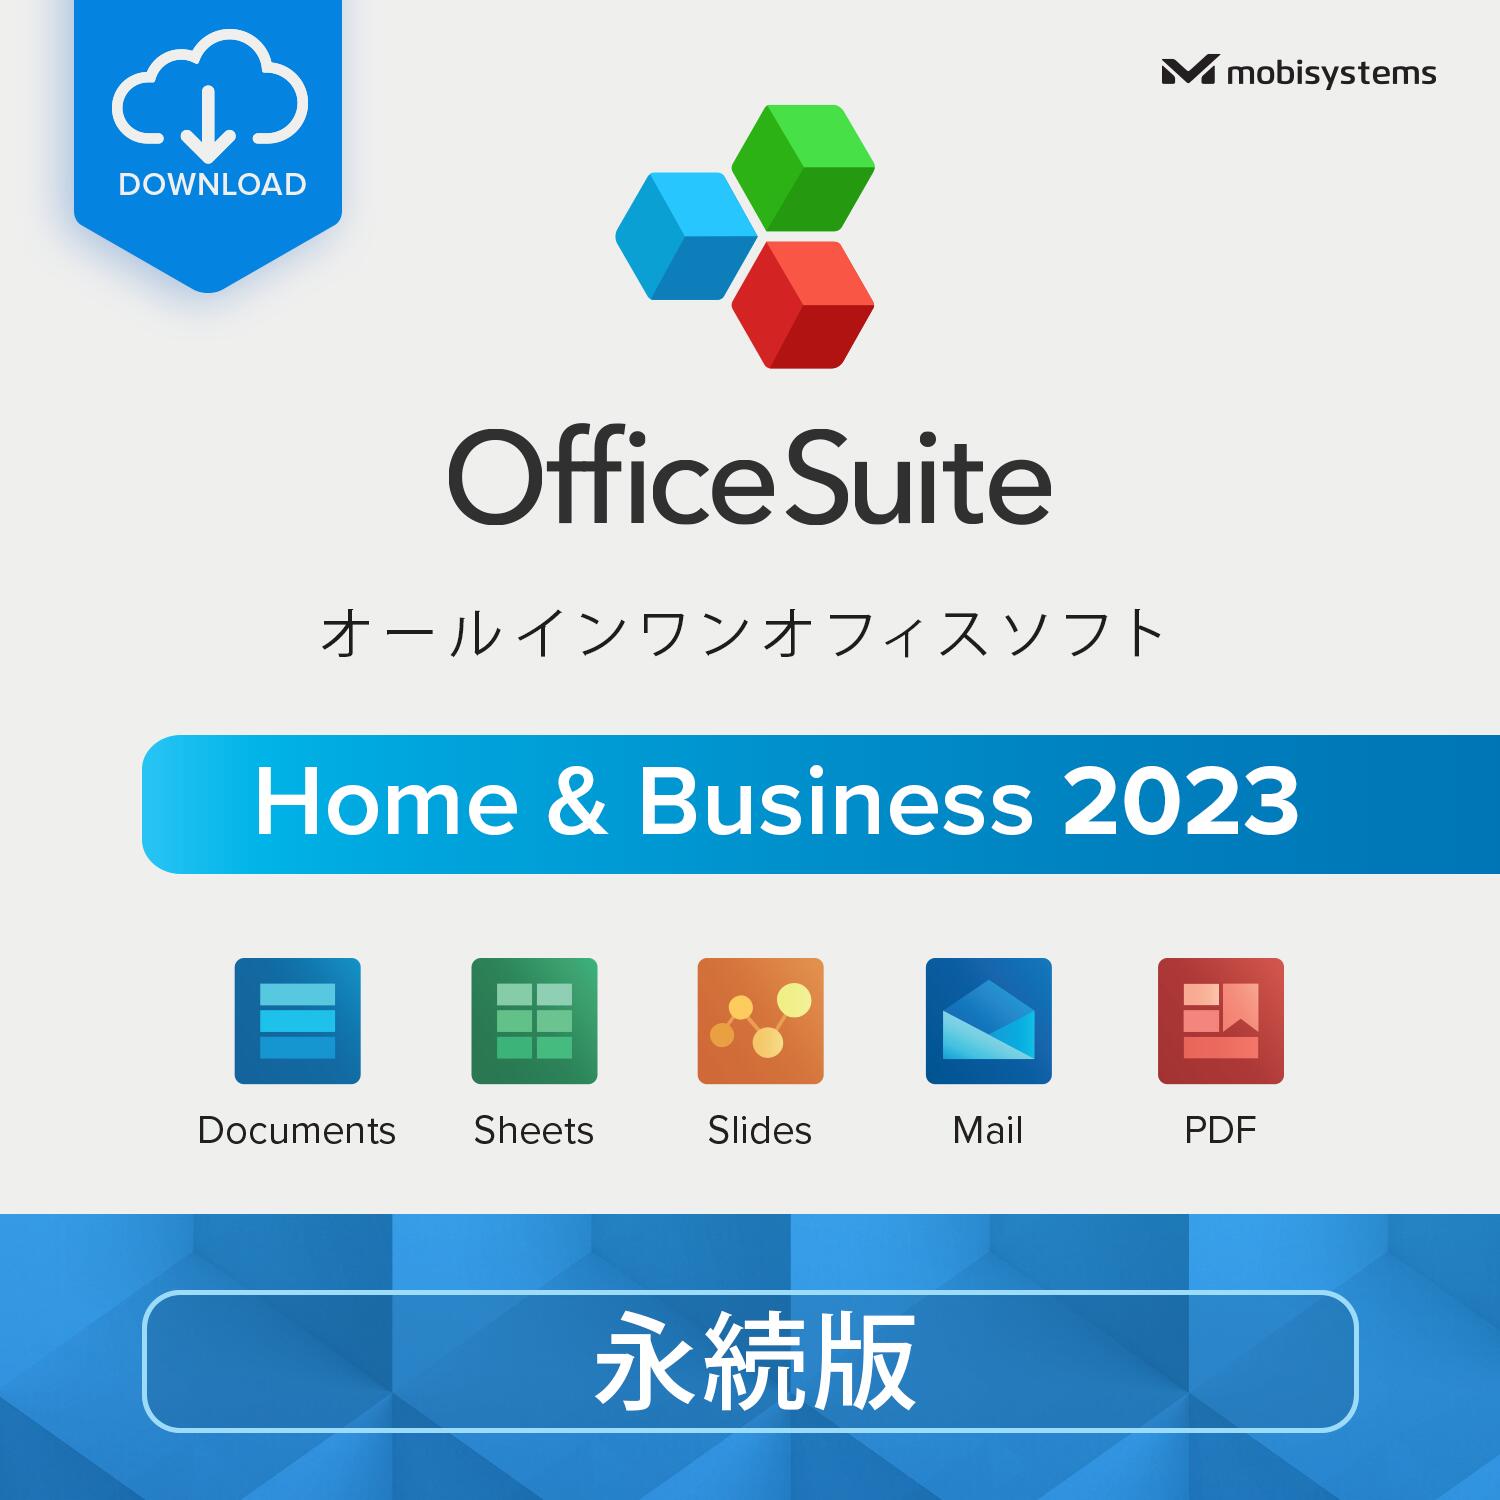 【OfficeSuite Home Business】 ー フルライセンス ー Documents, Sheets, Slides, PDF Viewer, Mail Calendar for Windows 永続版 1ユーザあたり PC1台 ダウンロード版